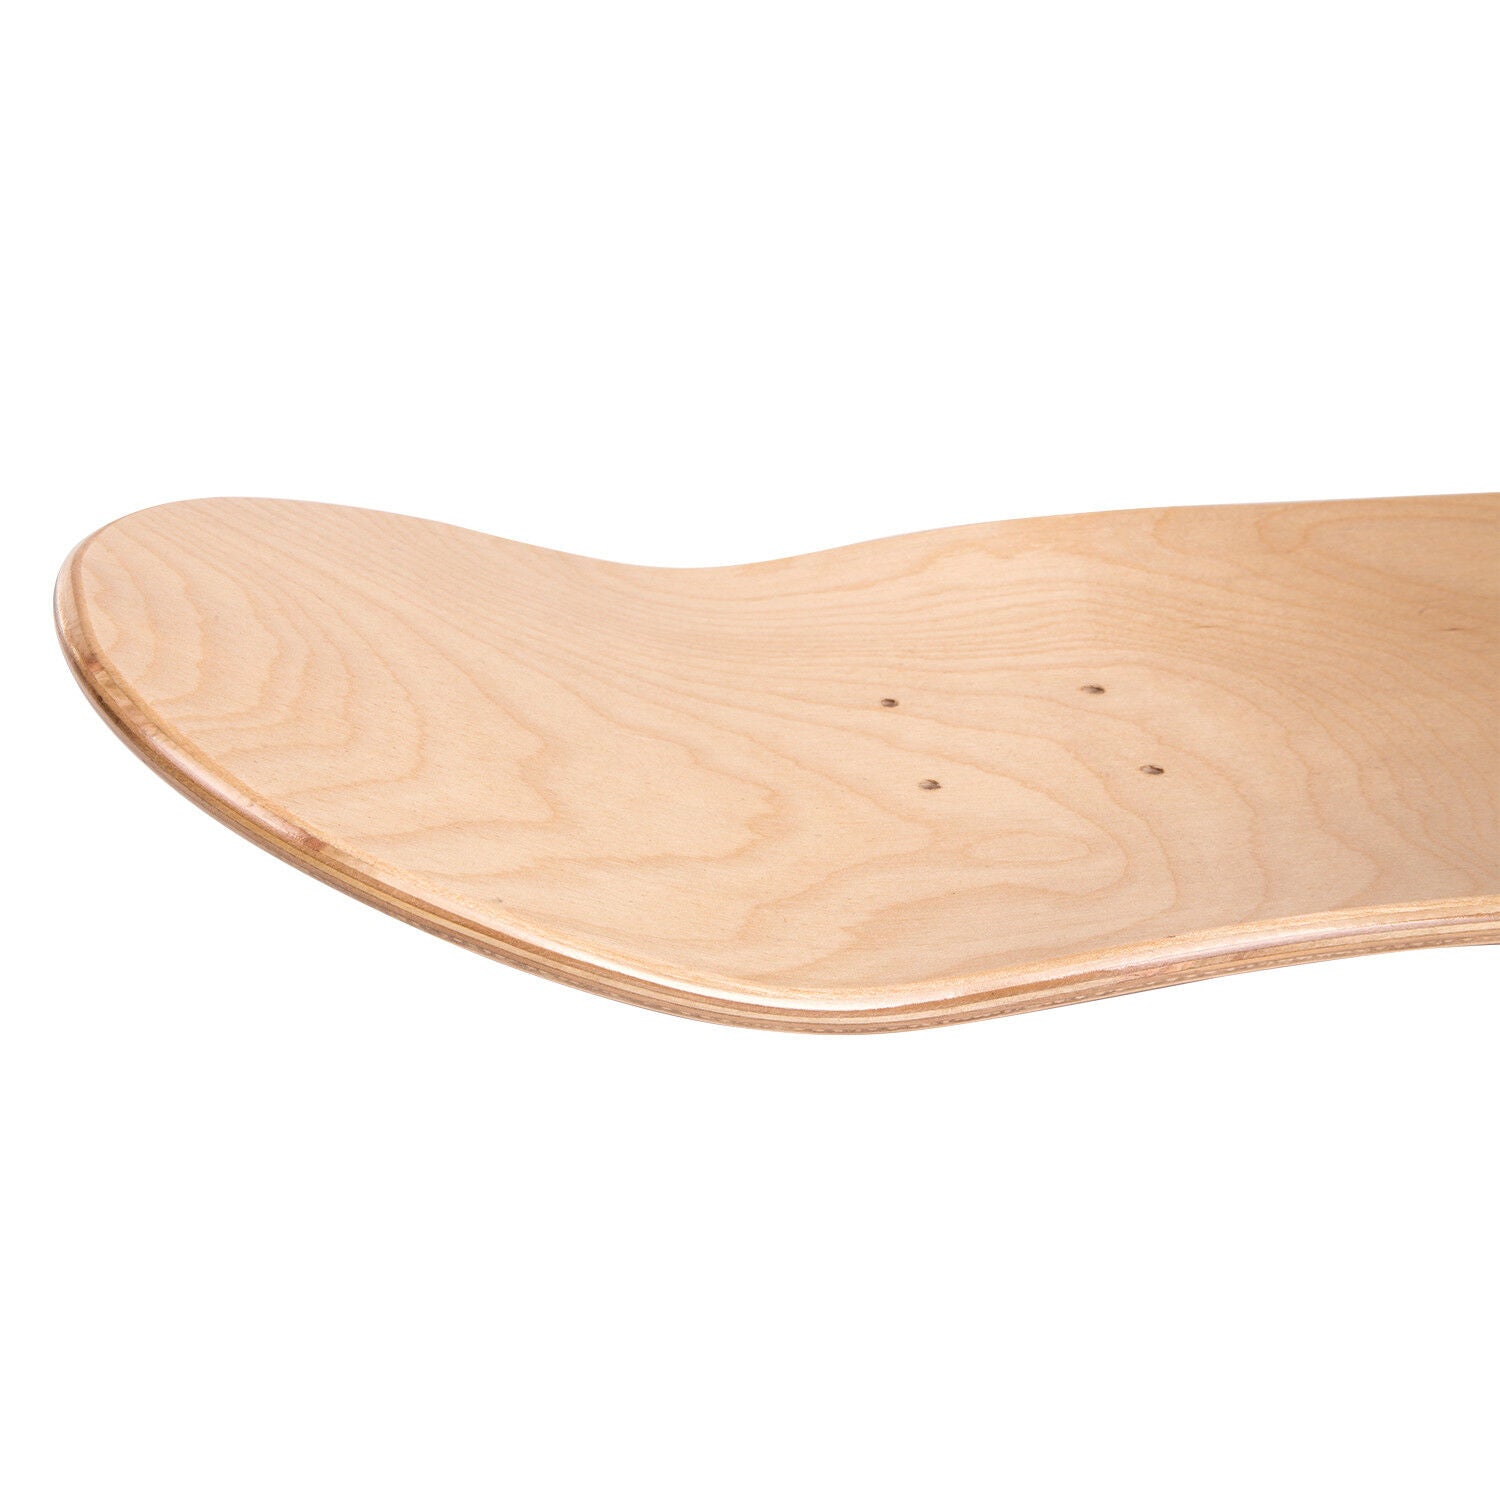 Blank Cold-Pressed Canadian Maple Skateboard Deck – Cal 7